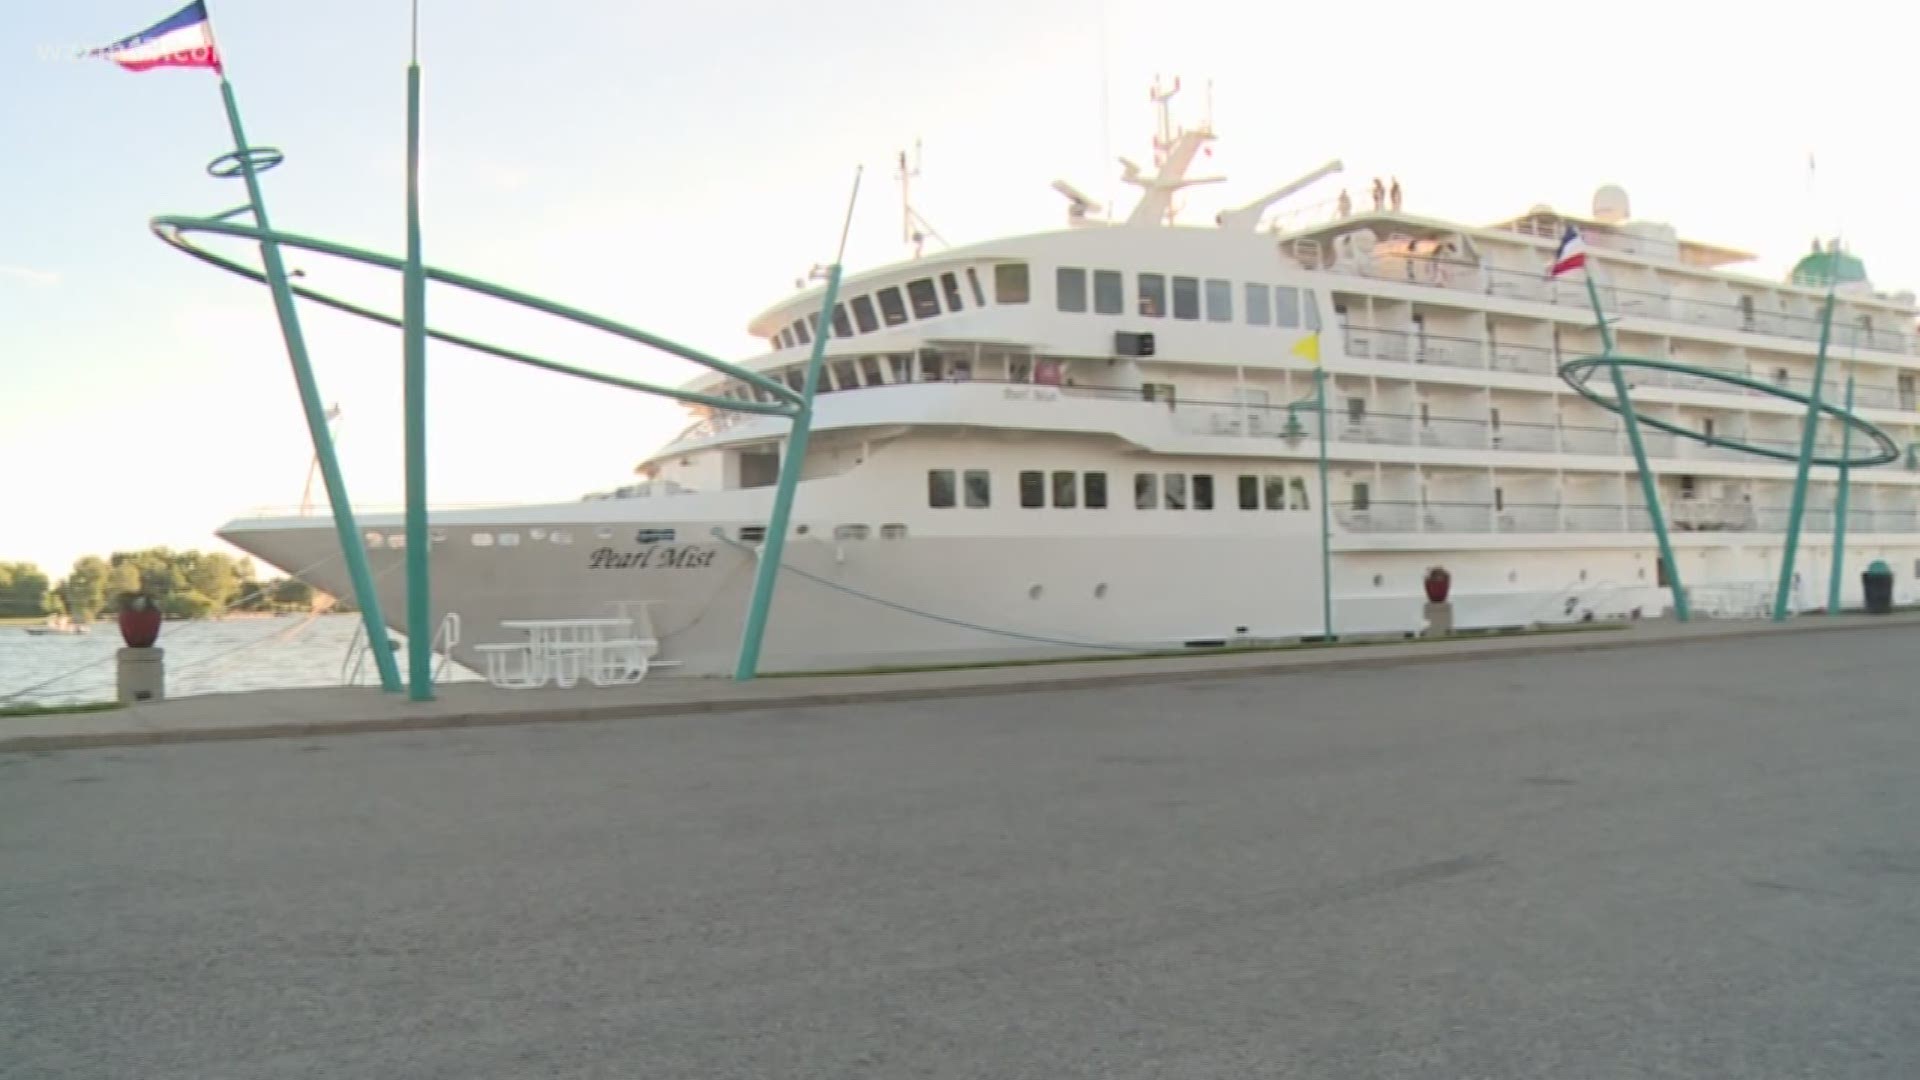 Today marks the start of cruise ship season on the Great Lakes with the first of the ships arriving in Muskegon today. The Victory I cruise ship will arrive in Muskegon around 7 a.m. on Thursday May, 23. The 300-ft. ship will dock at Heritage Landing and depart around 6 p.m.